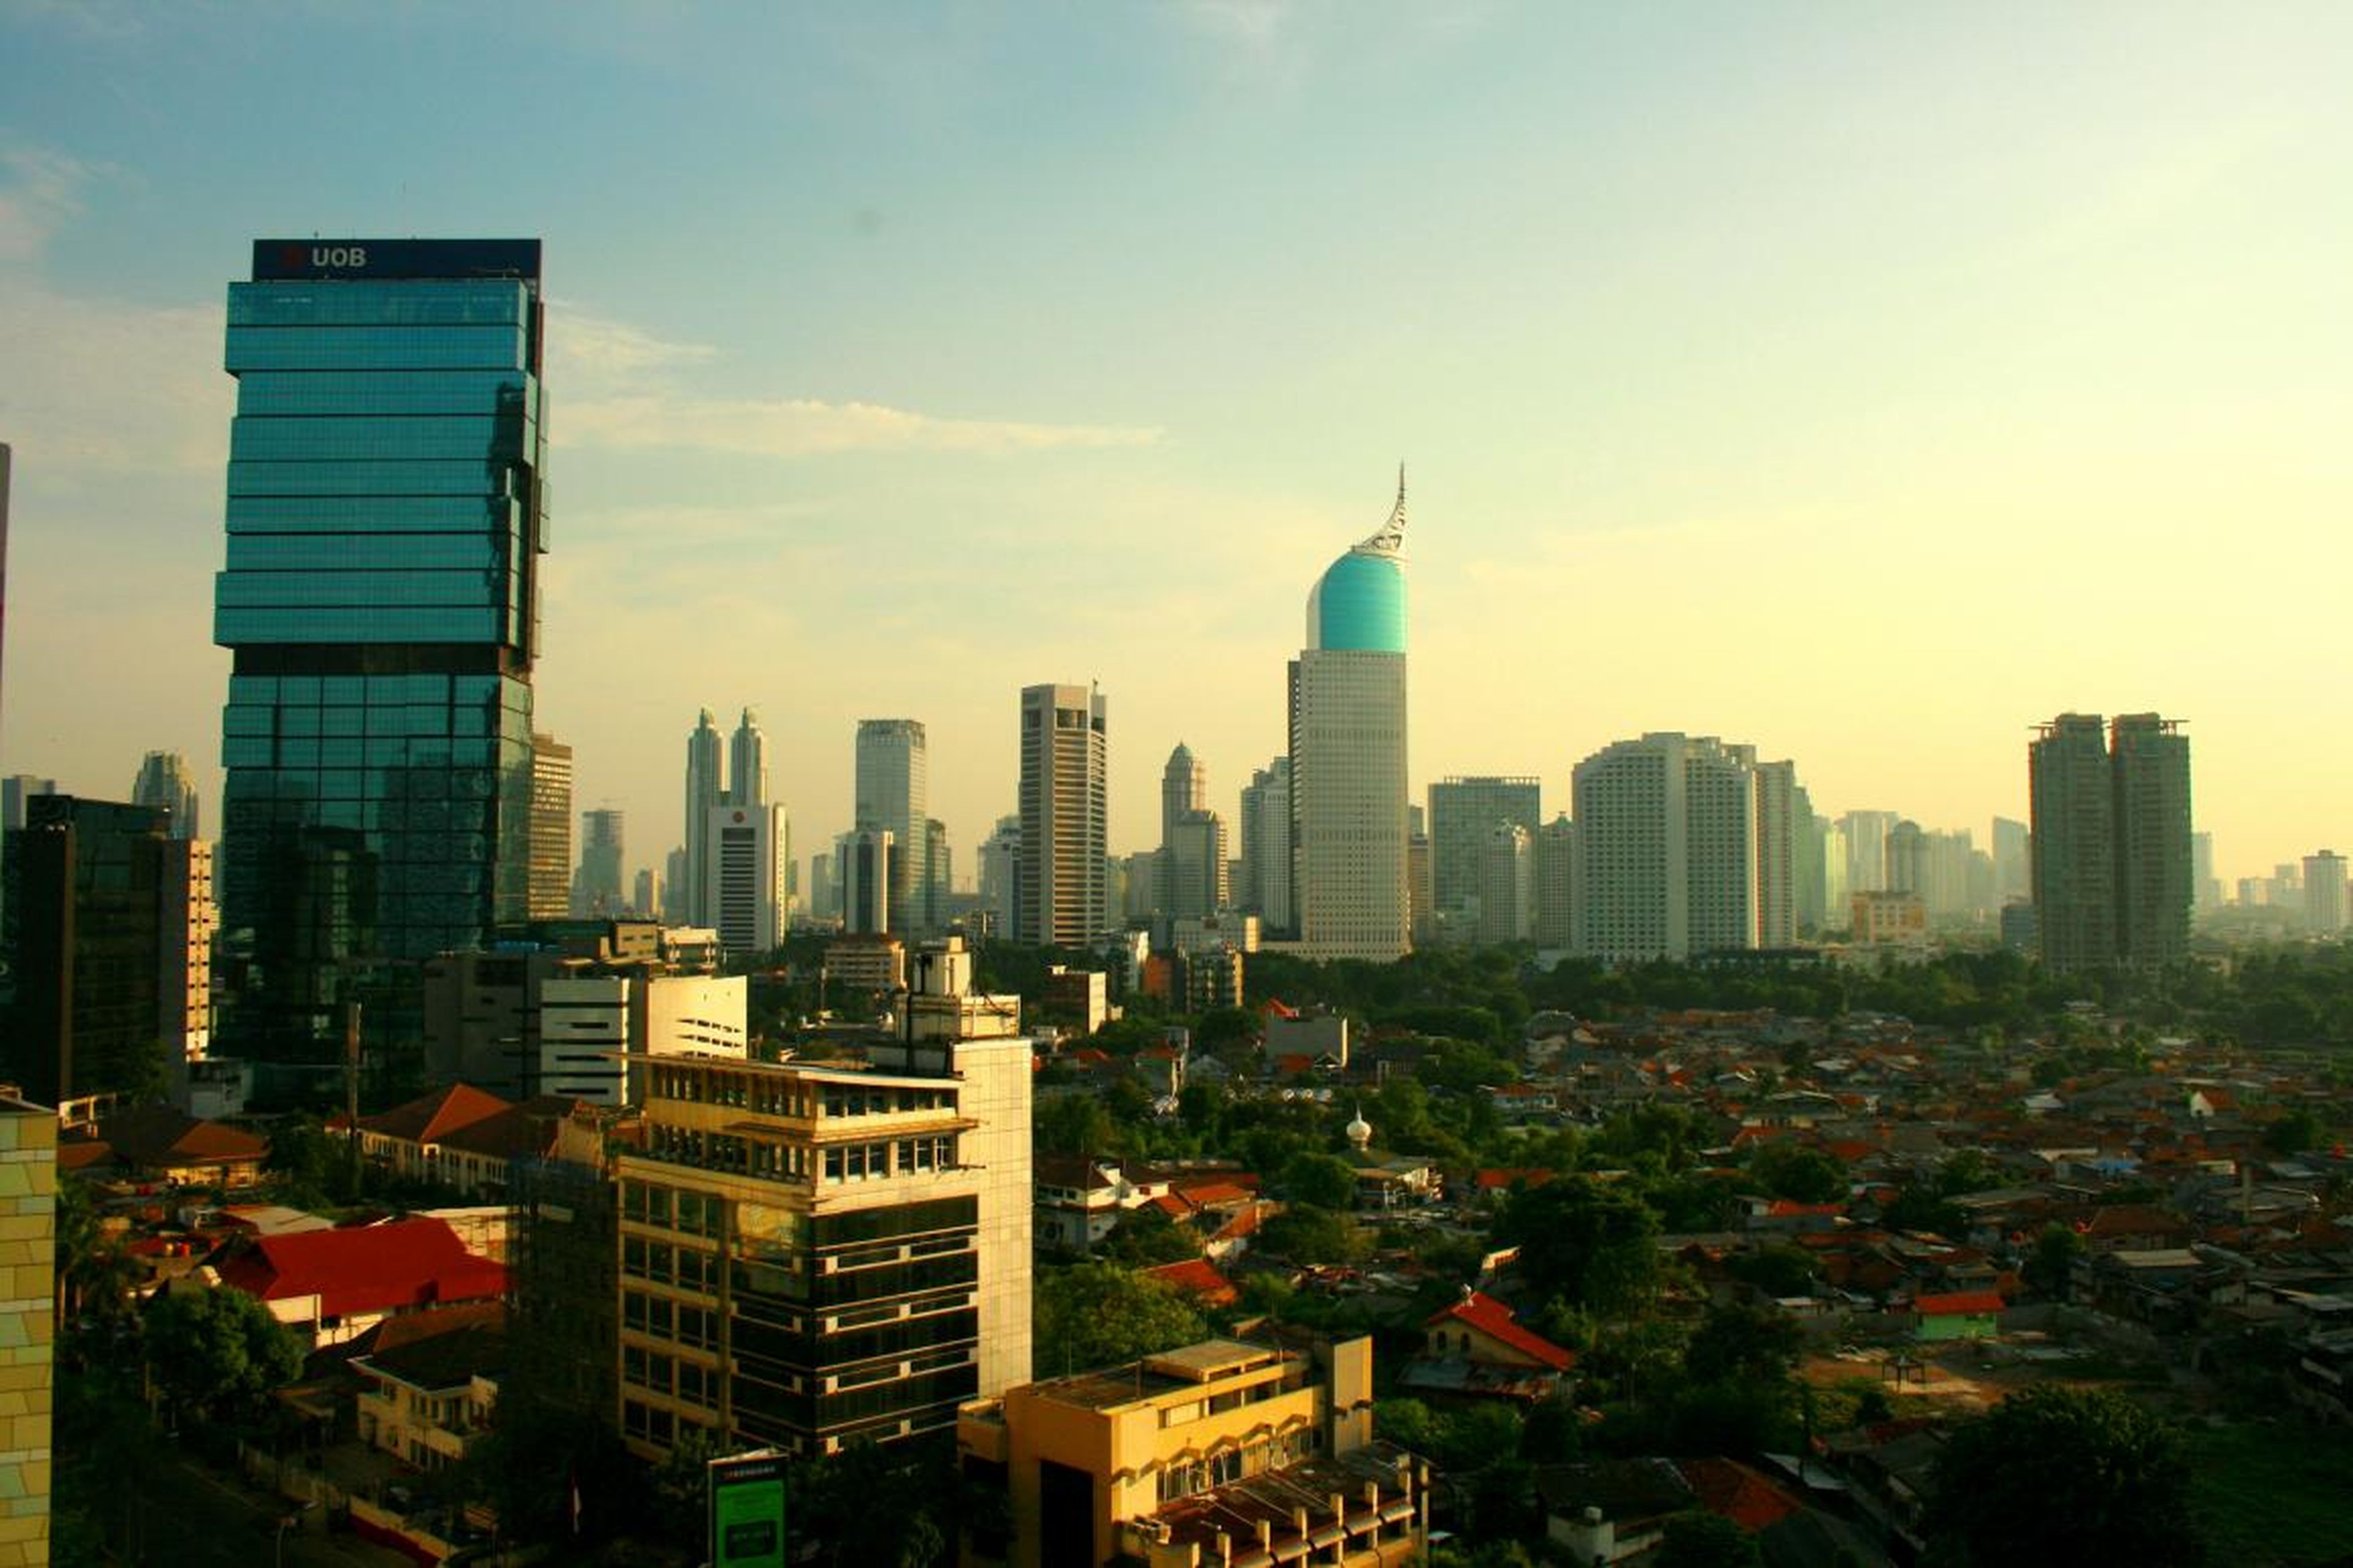 12. Located on the coast of the Java Sea, Jakarta is one of the largest cities in Southeast Asia.